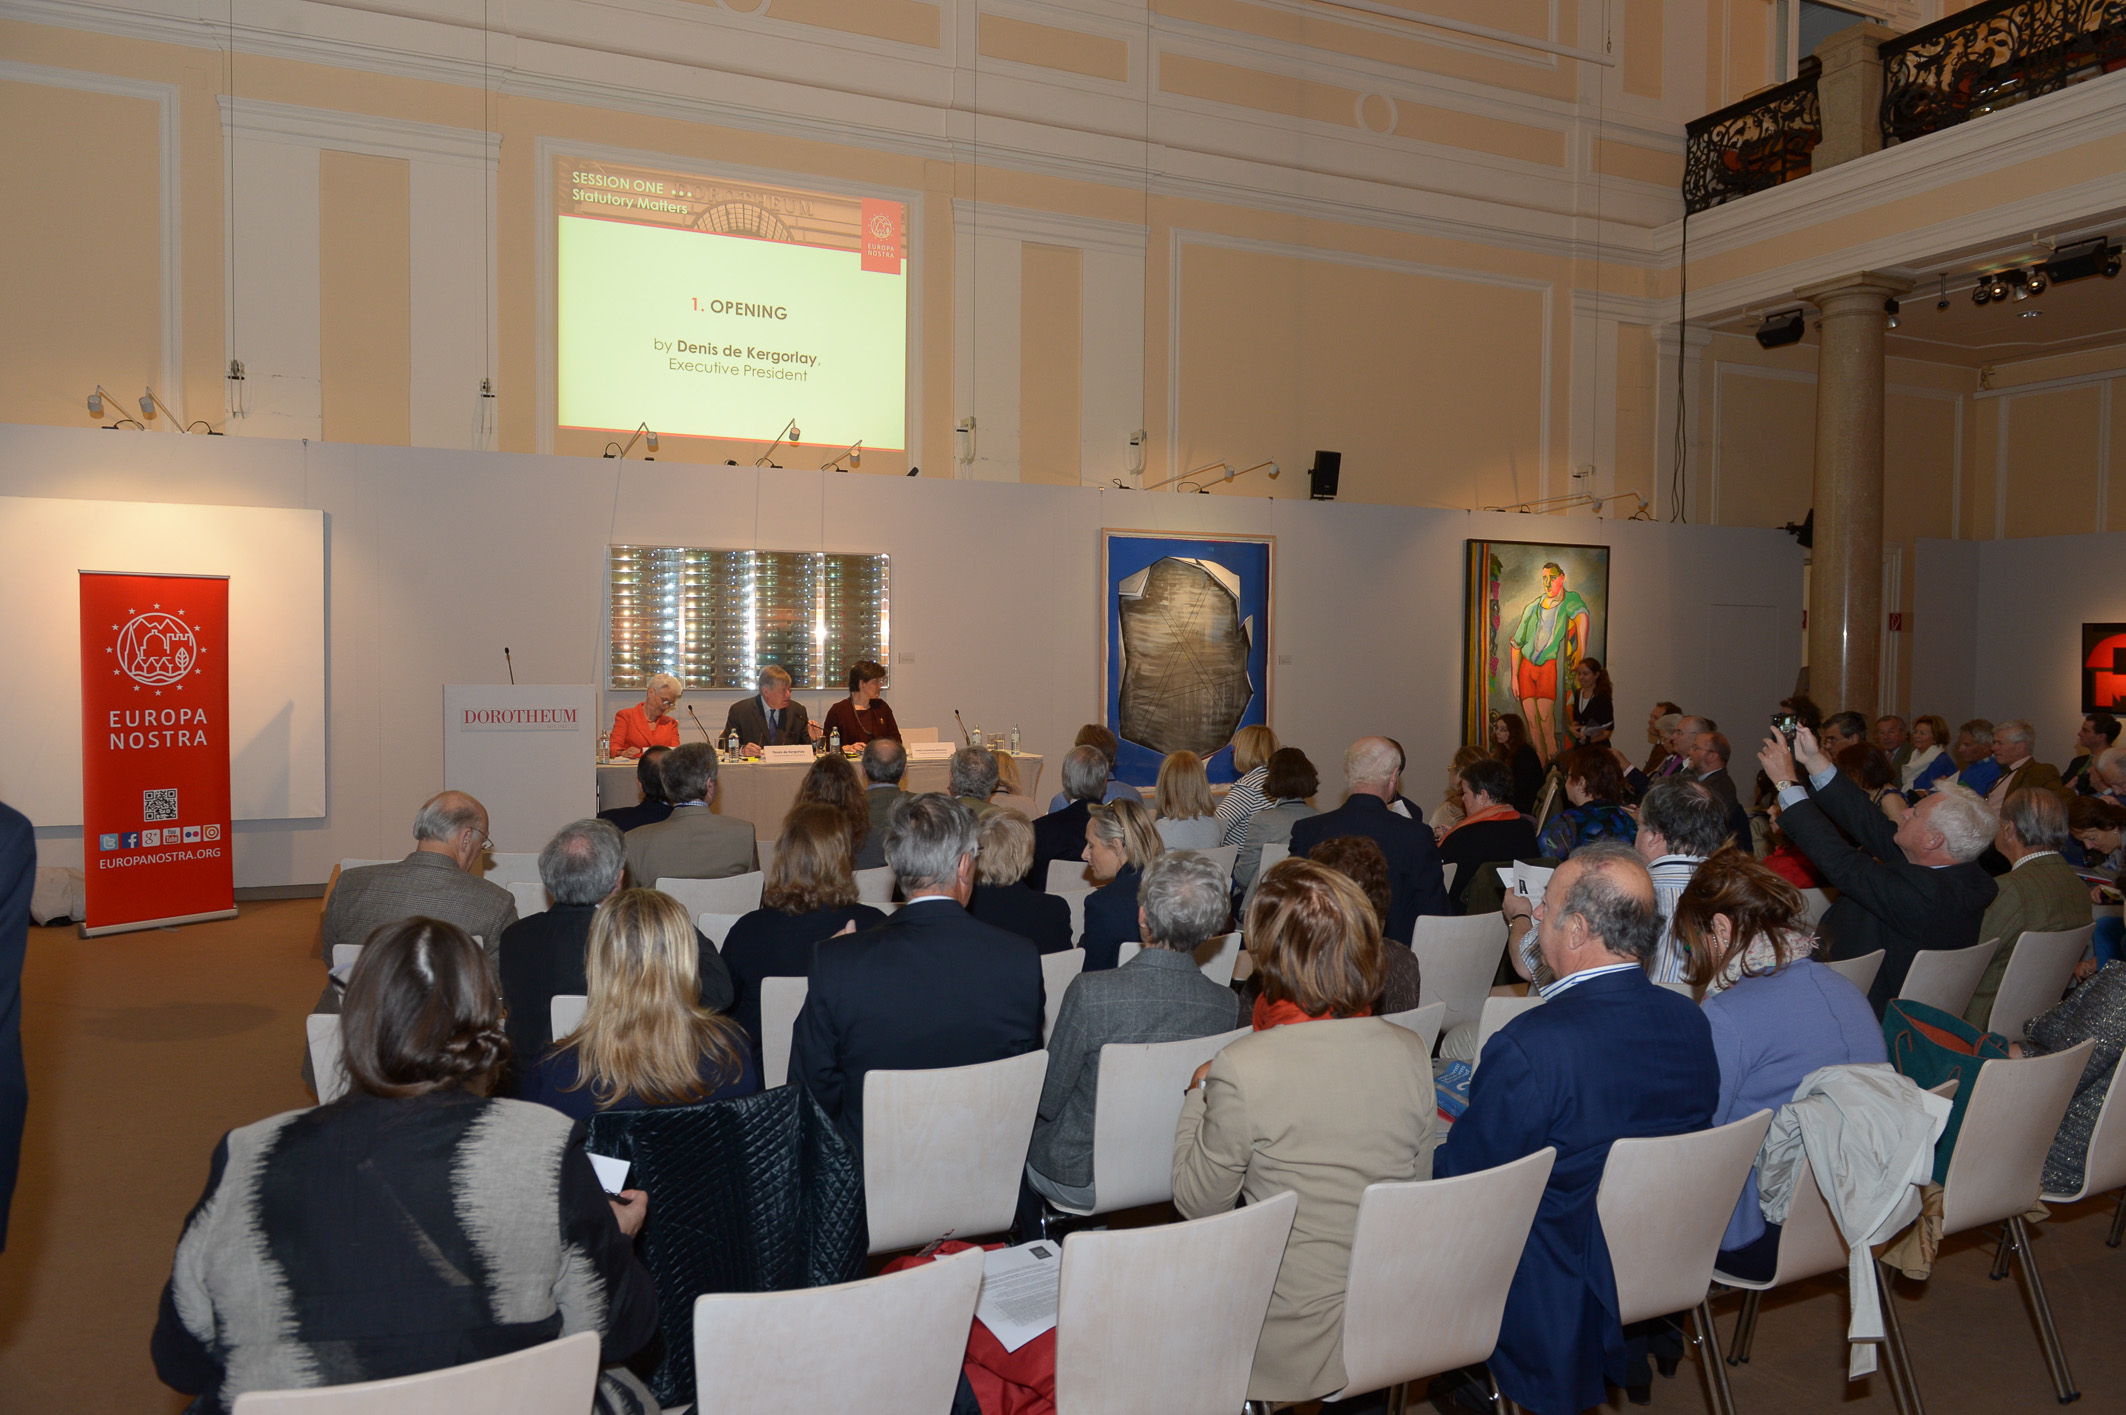 The General Assembly of Europa Nostra took place on 4 May at the Franz Joseph Hall of the Dorotheum Palace. Photo: Oreste Schaller.